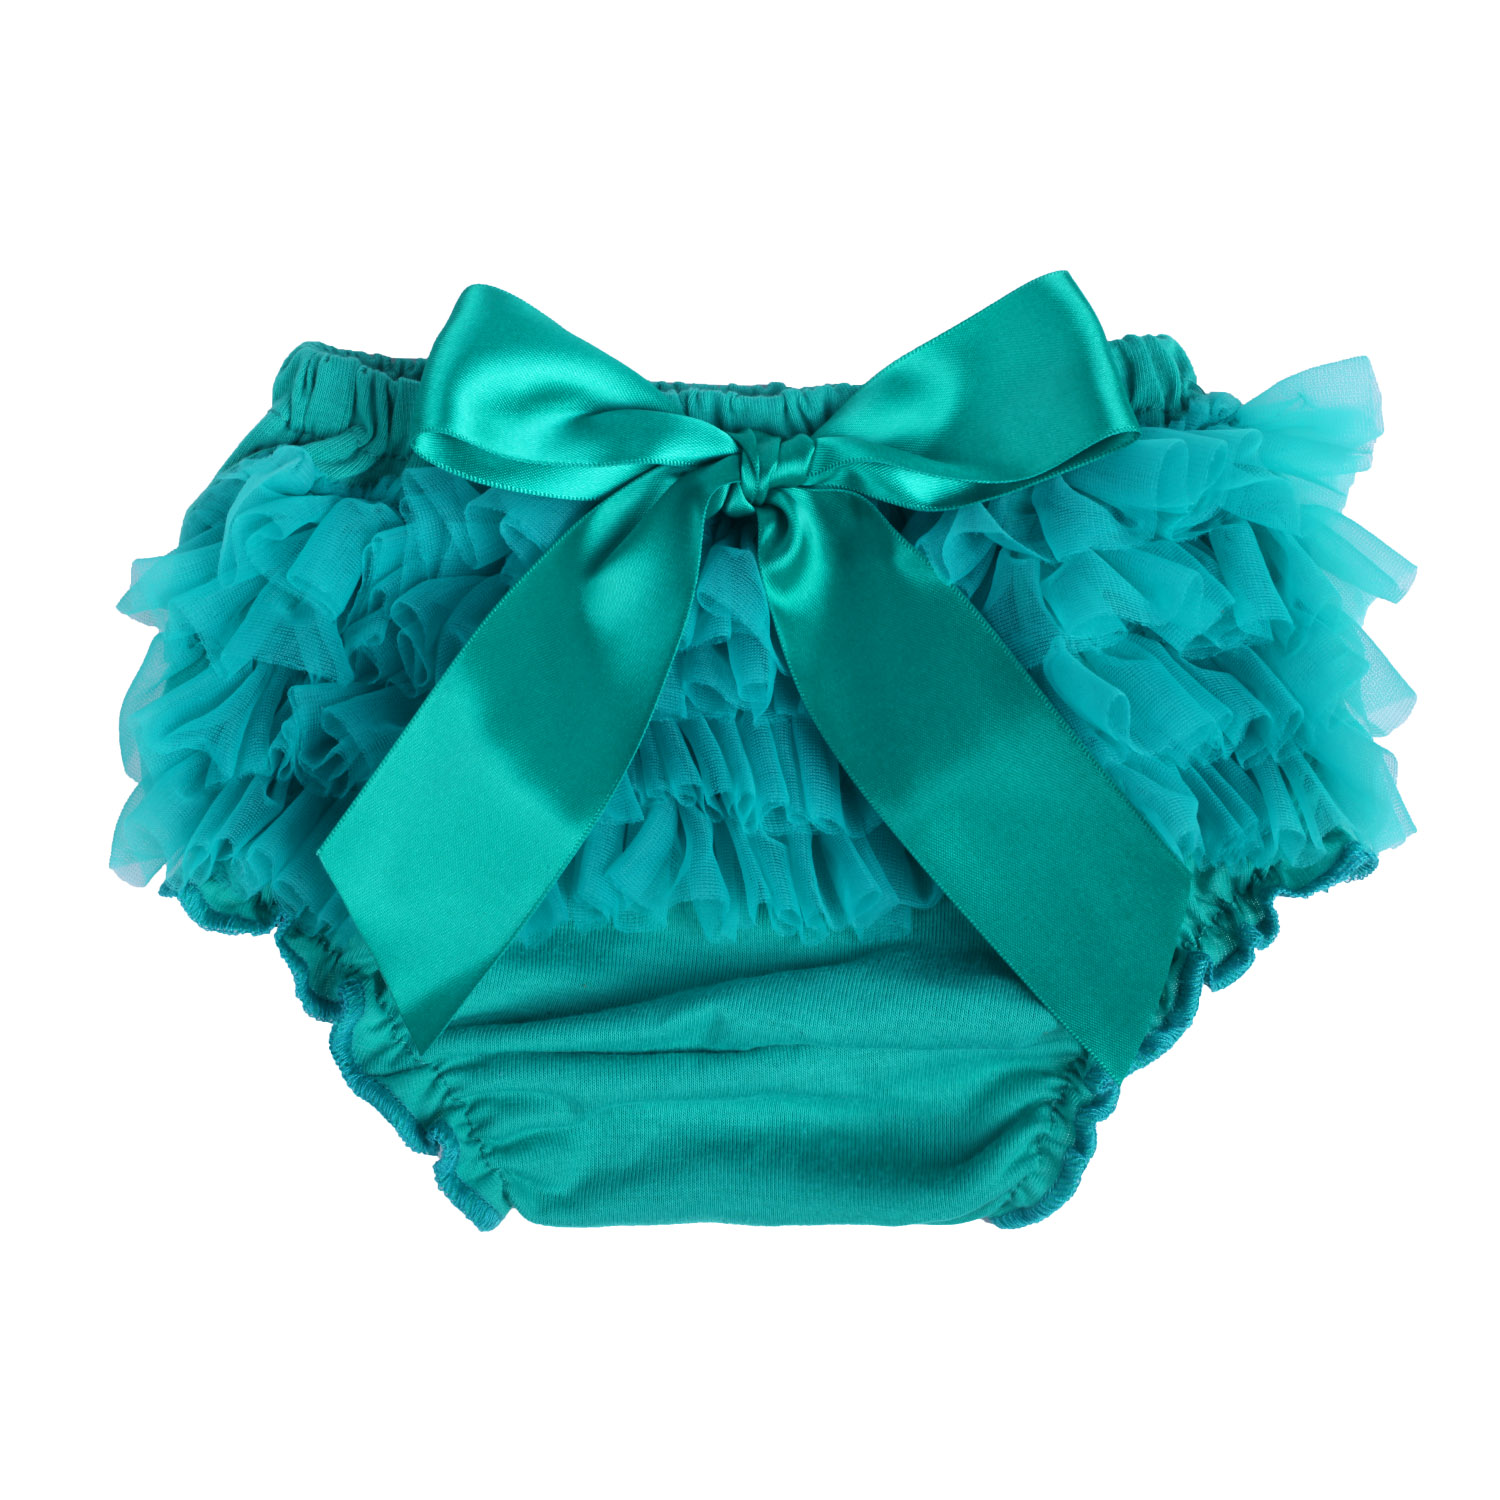 Teal Ruffle Bloomer Diaper Cover for Baby Girls Toddlers-bloomer-icobuty